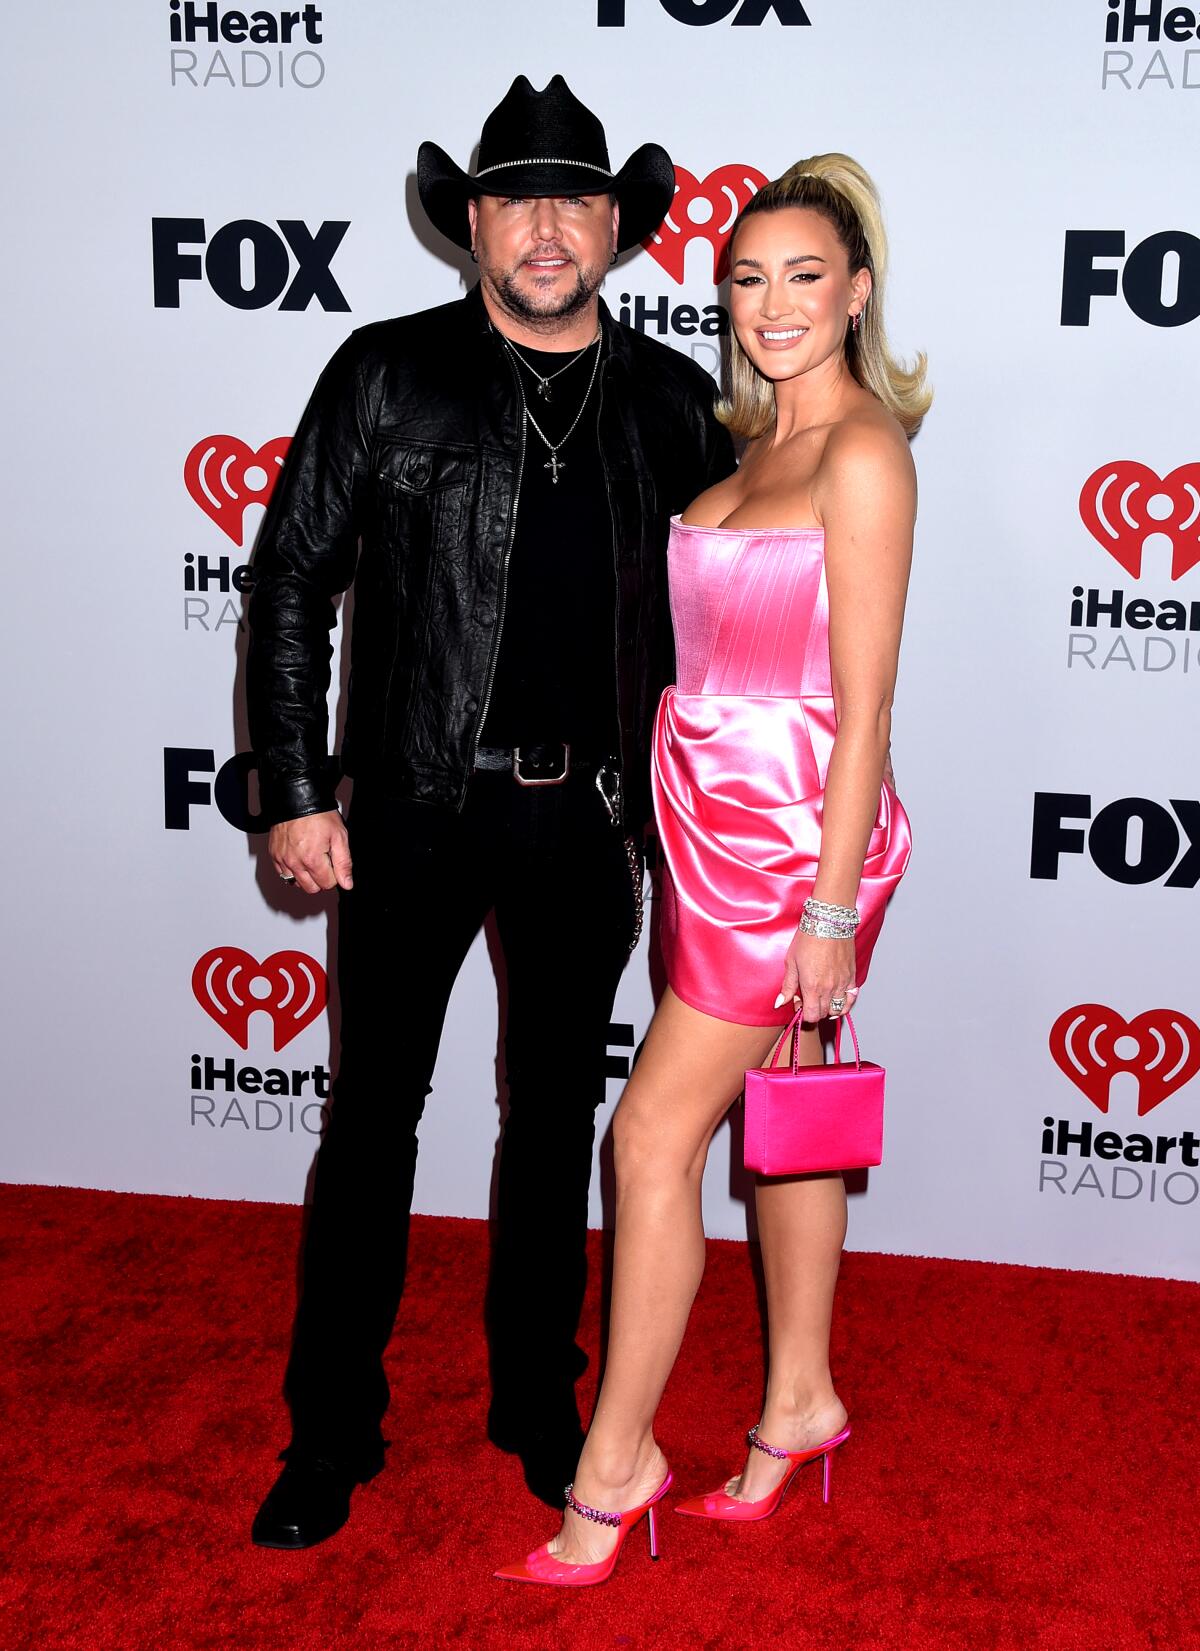 Jason Aldean and wife Brittany Kerr.